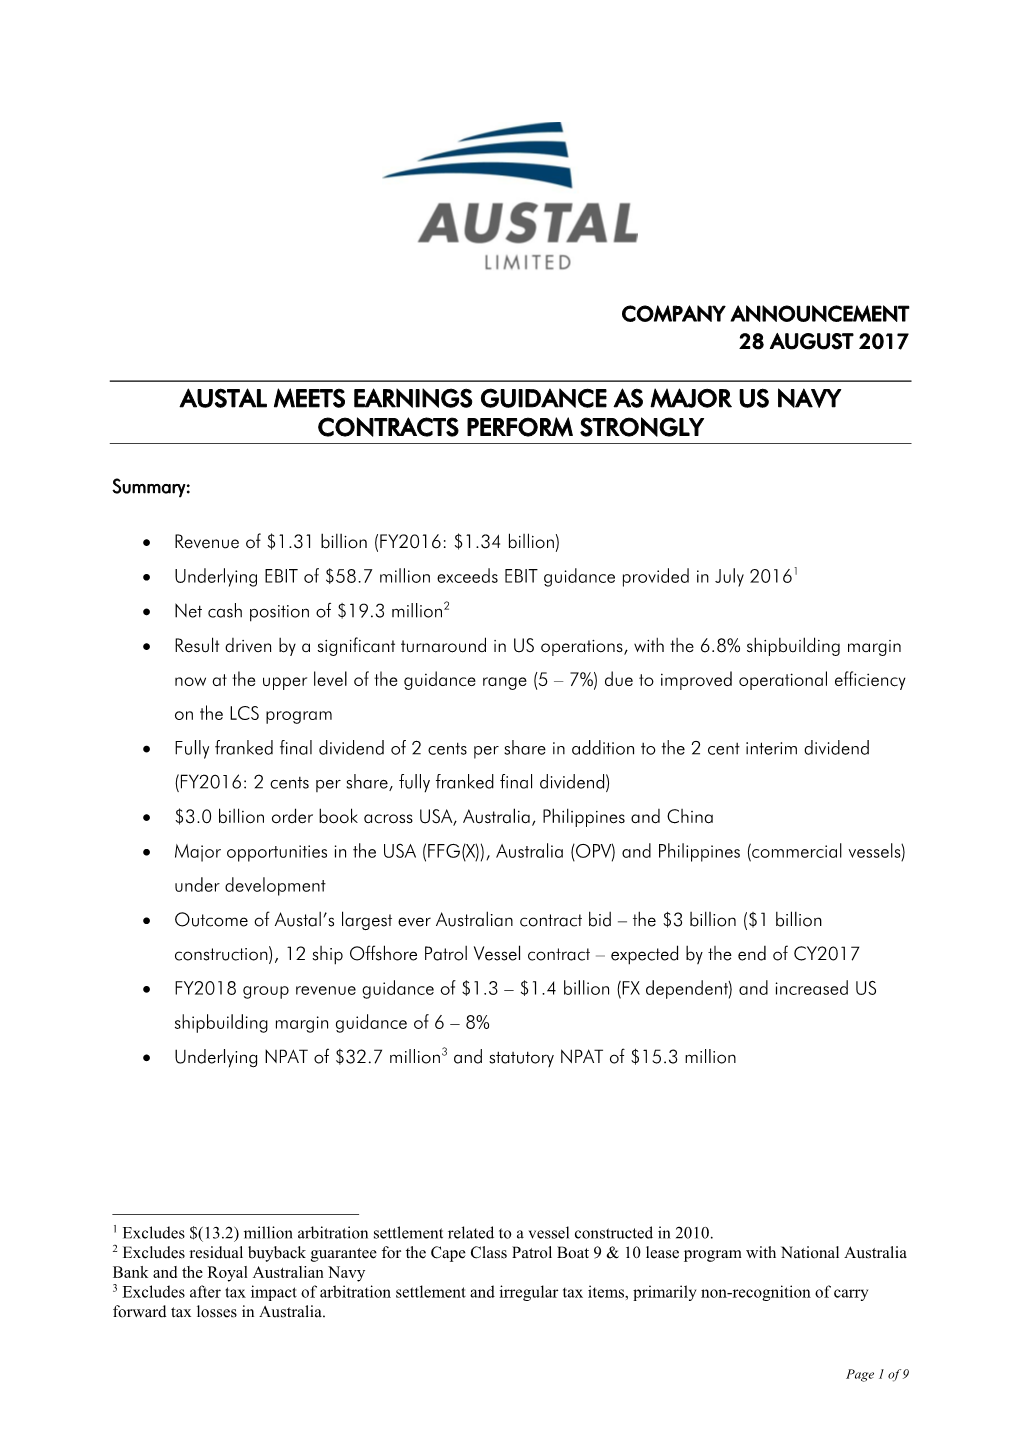 Austal Meets Earnings Guidance As Major Us Navy Contracts Perform Strongly